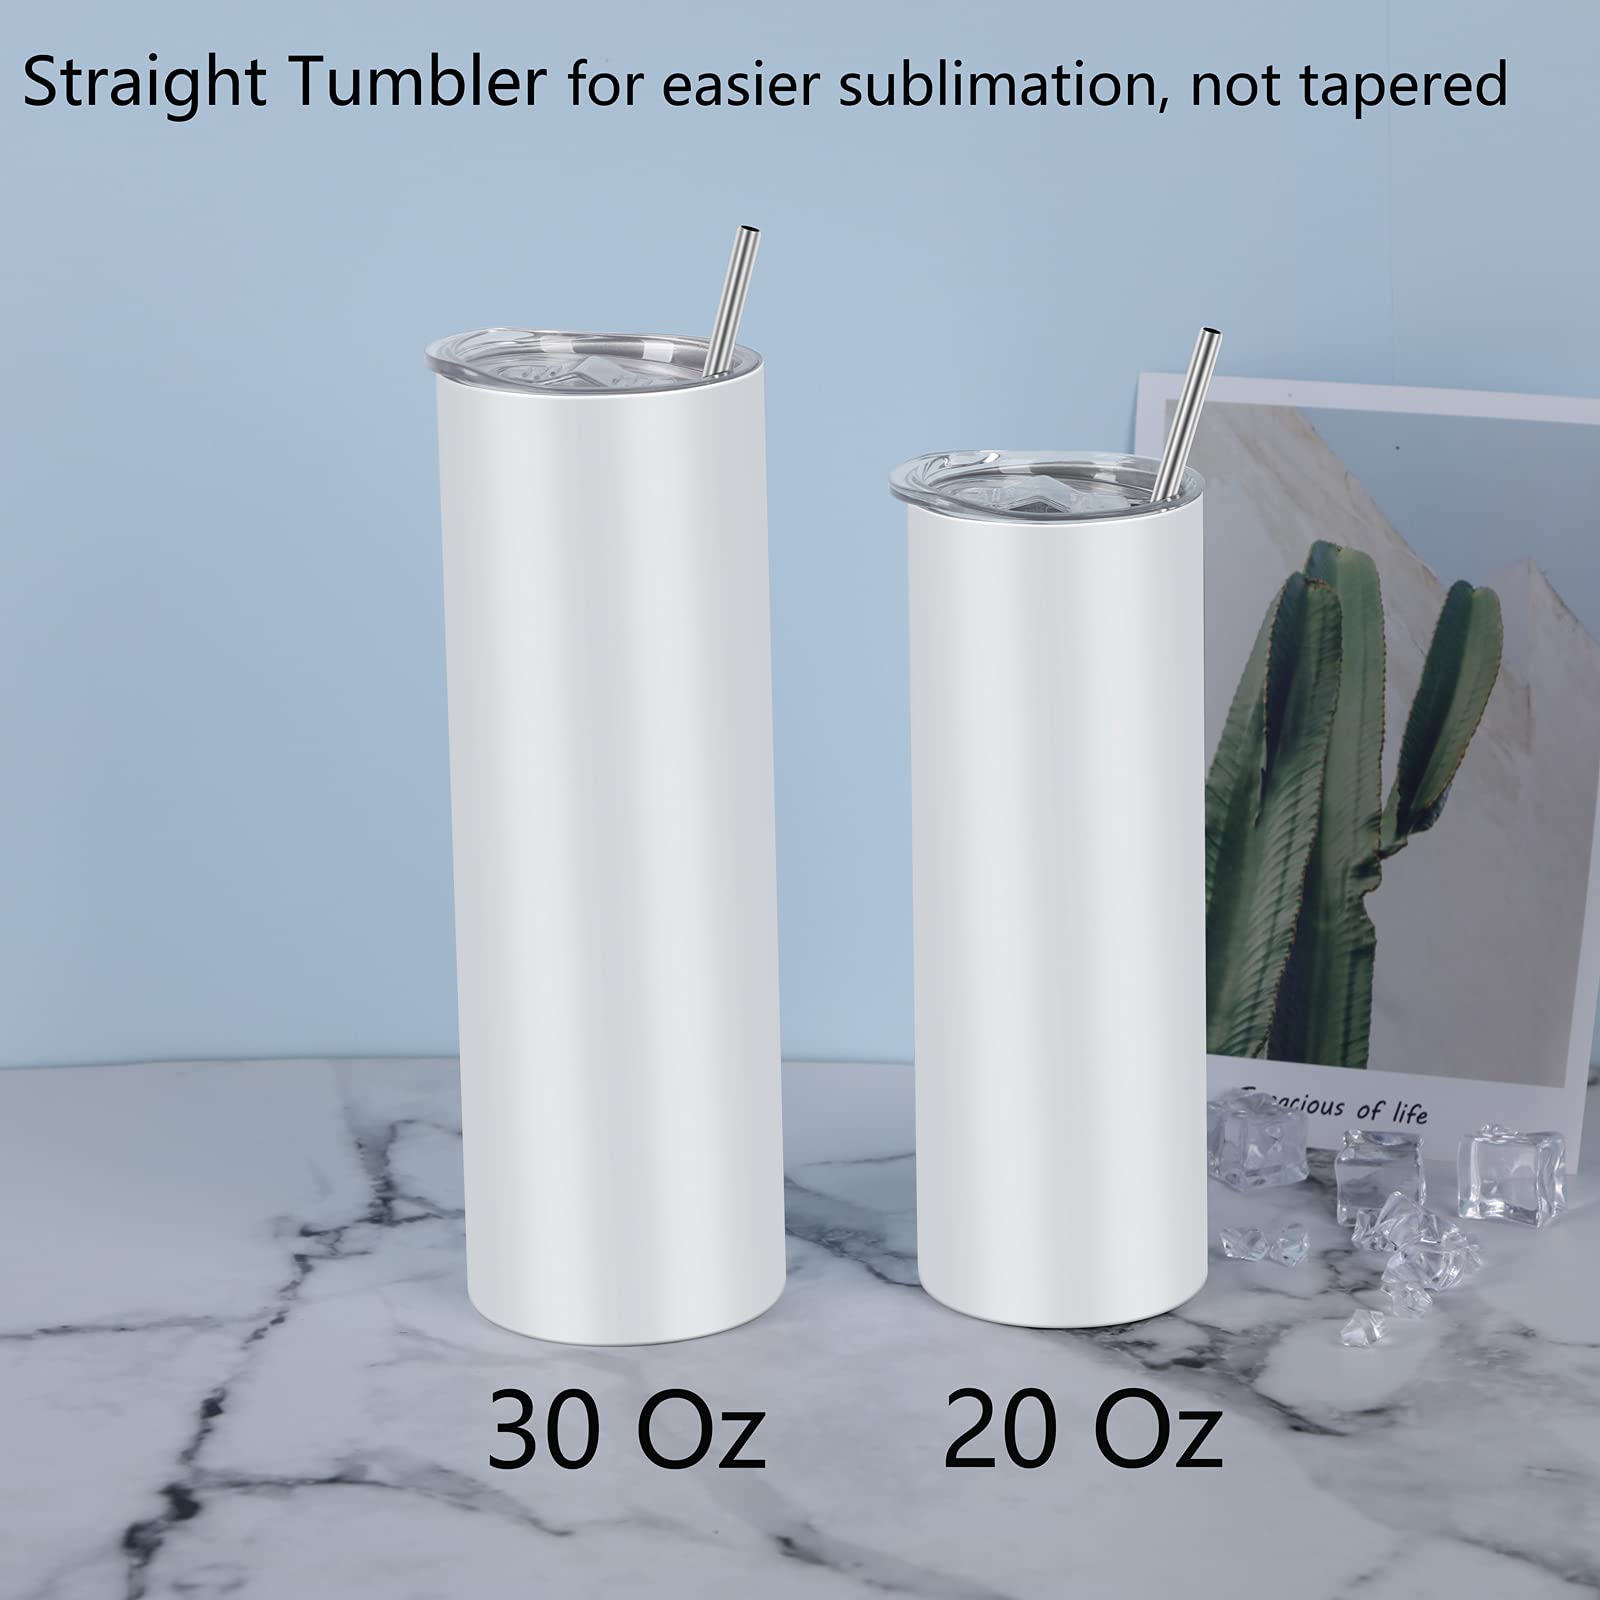 Tswofia 8 Pack Straight Sublimation Tumblers Set 30 Oz Skinny, Stainless Steel Skinny Sublimation Tumbler Blank With Shrink Wrap Film Lid Straw Set,Individually Boxed, Not Tapered